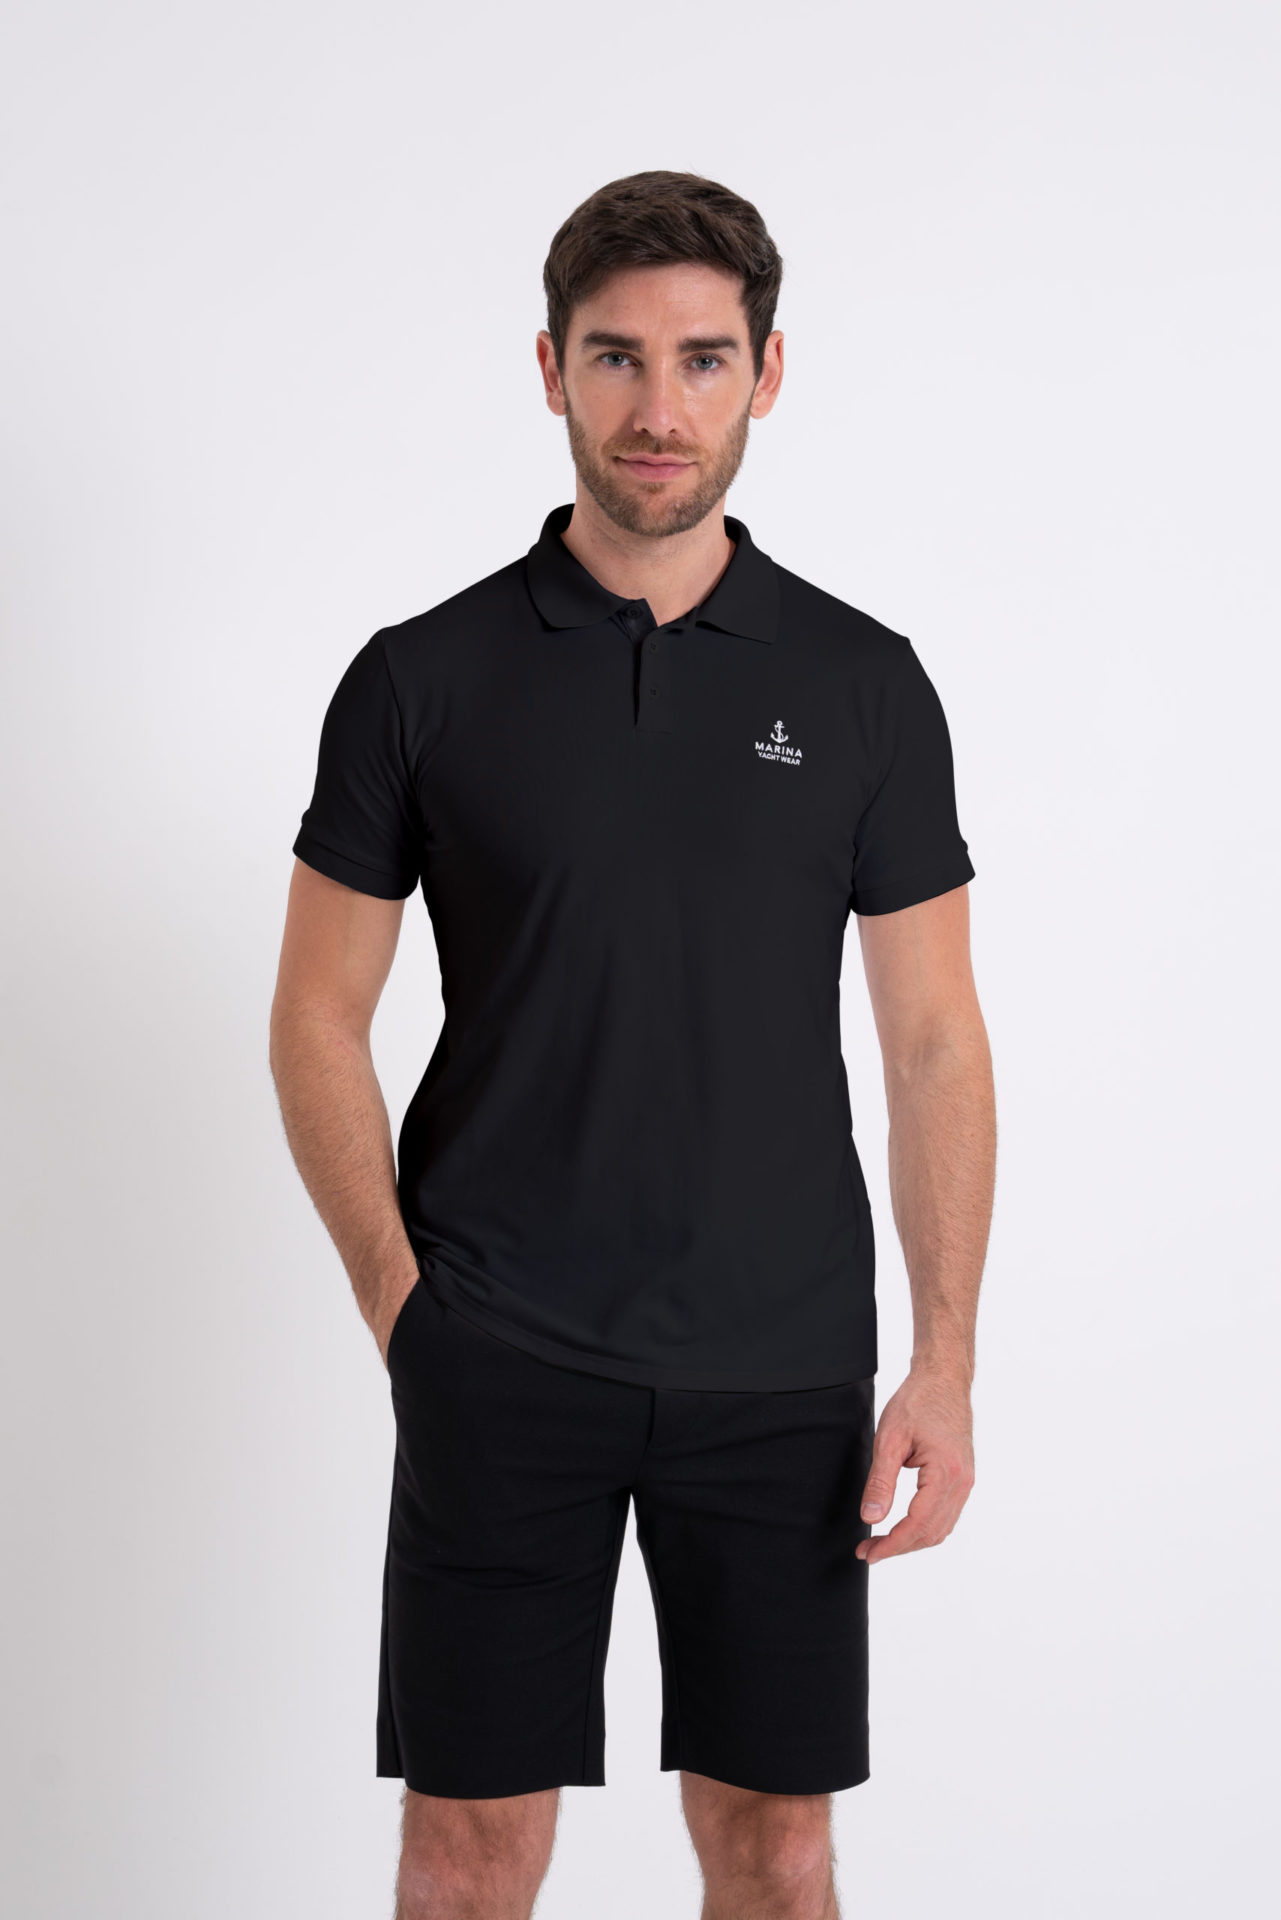 Mens Recycled Polyester Polos for yacht crew